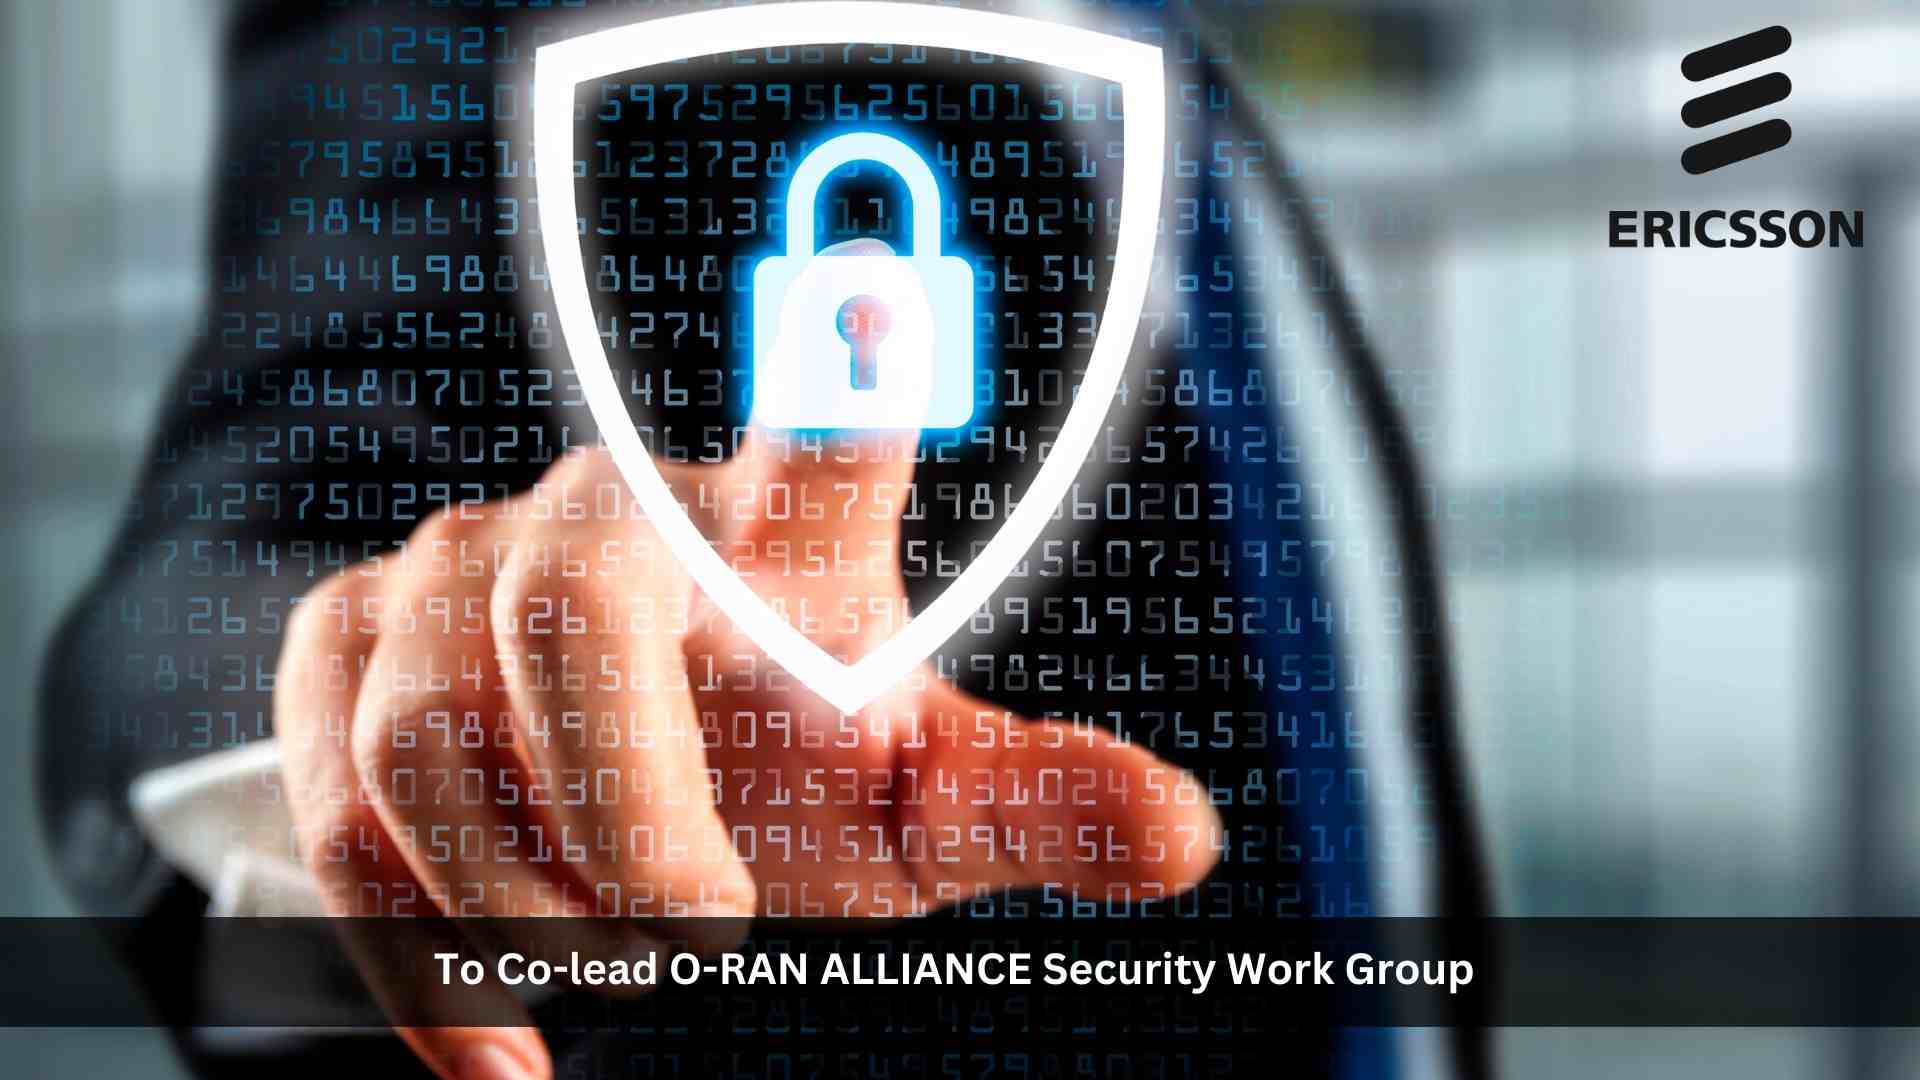 Ericsson to co-lead O-RAN ALLIANCE Security Work Group